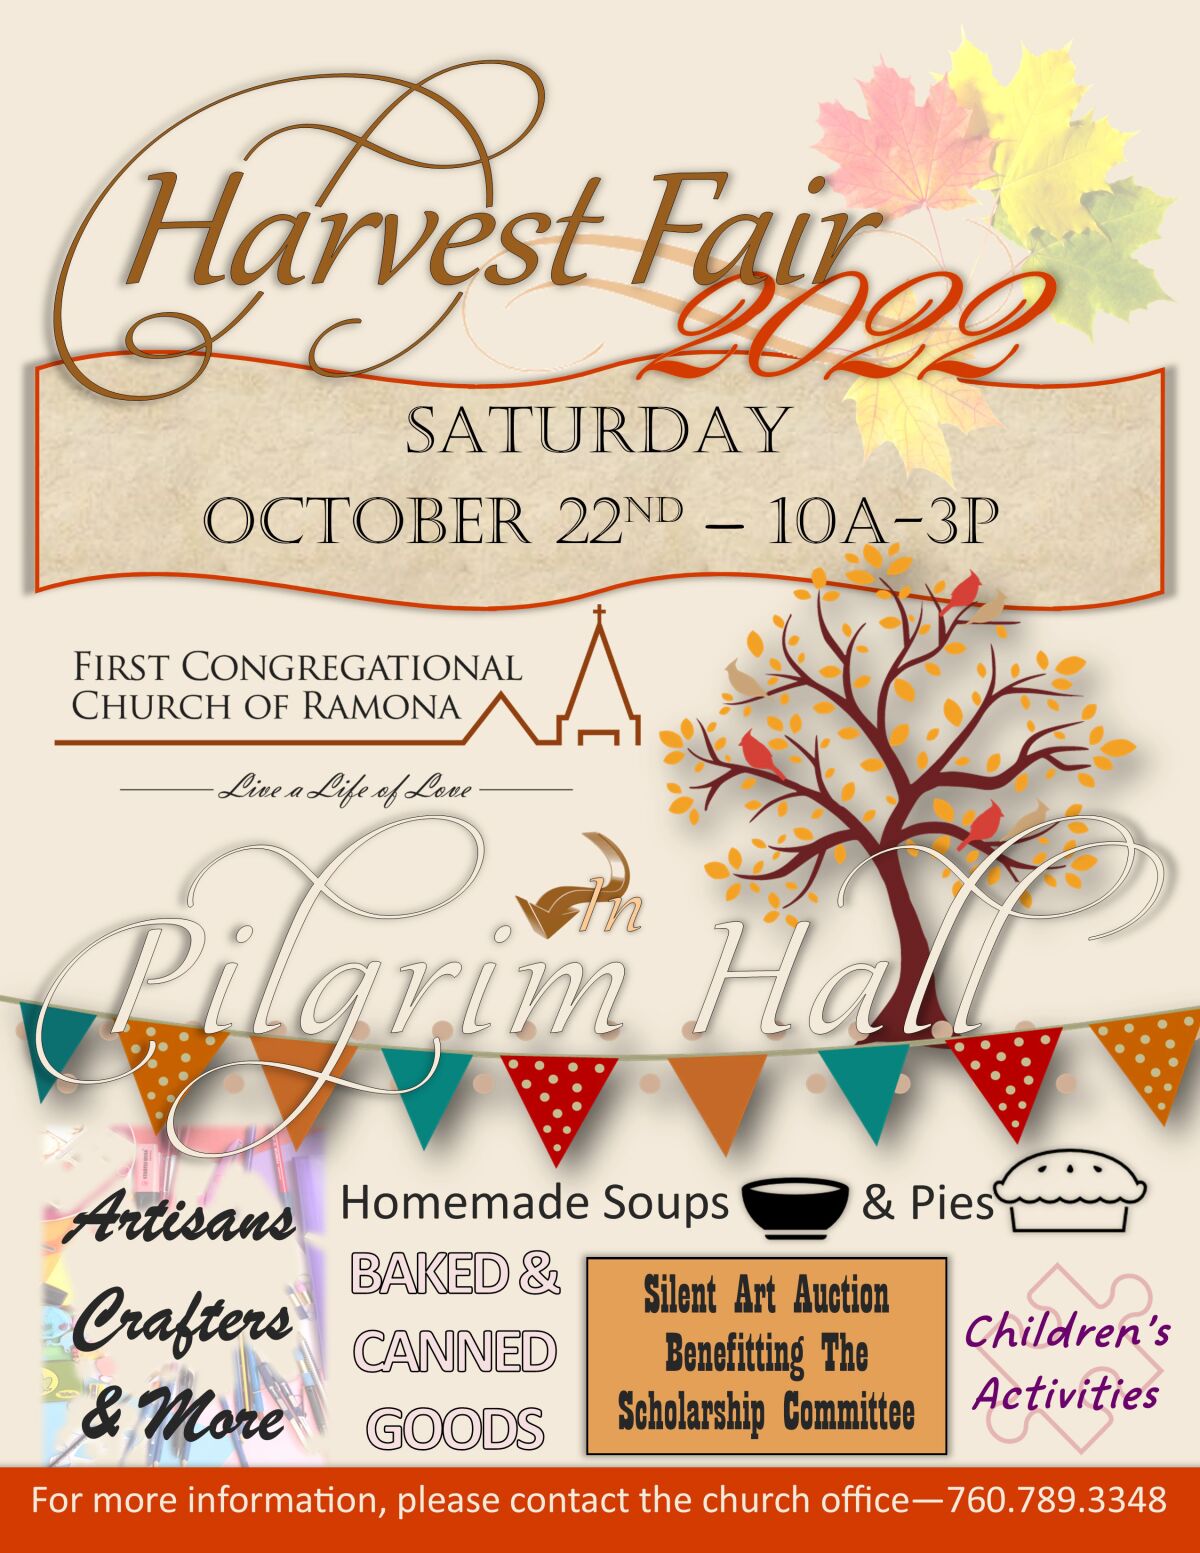 A Harvest Fair will be held at First Congregational Church of Ramona on Saturday, Oct. 22.